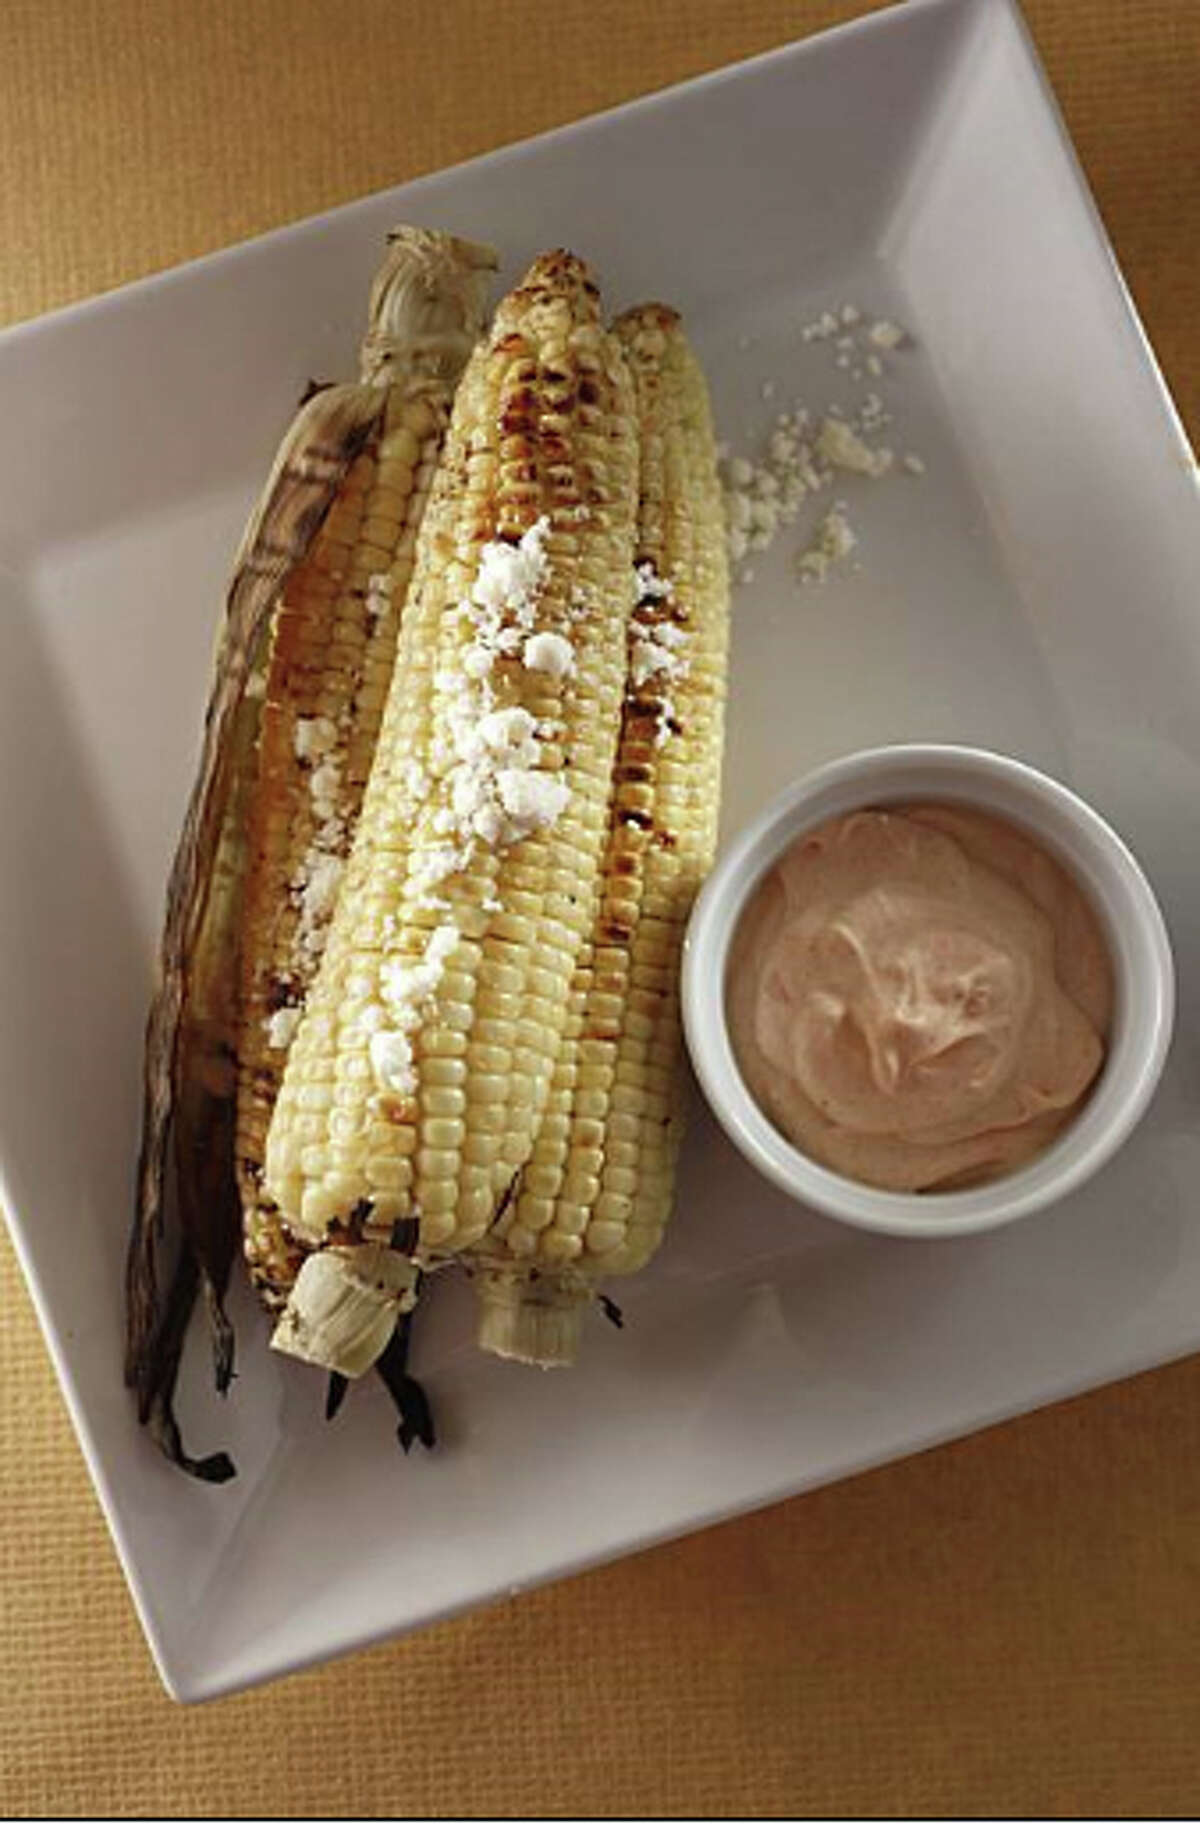 Grilled Corn on the Cob With Spicy Lime Creme Fraiche & Cotija Cheese: An upscale spin on the traditional Mexican street food. Recipe: http://www.sfgate.com/food/recipes/detail.html?p=detail&rid=18281&sorig=qs